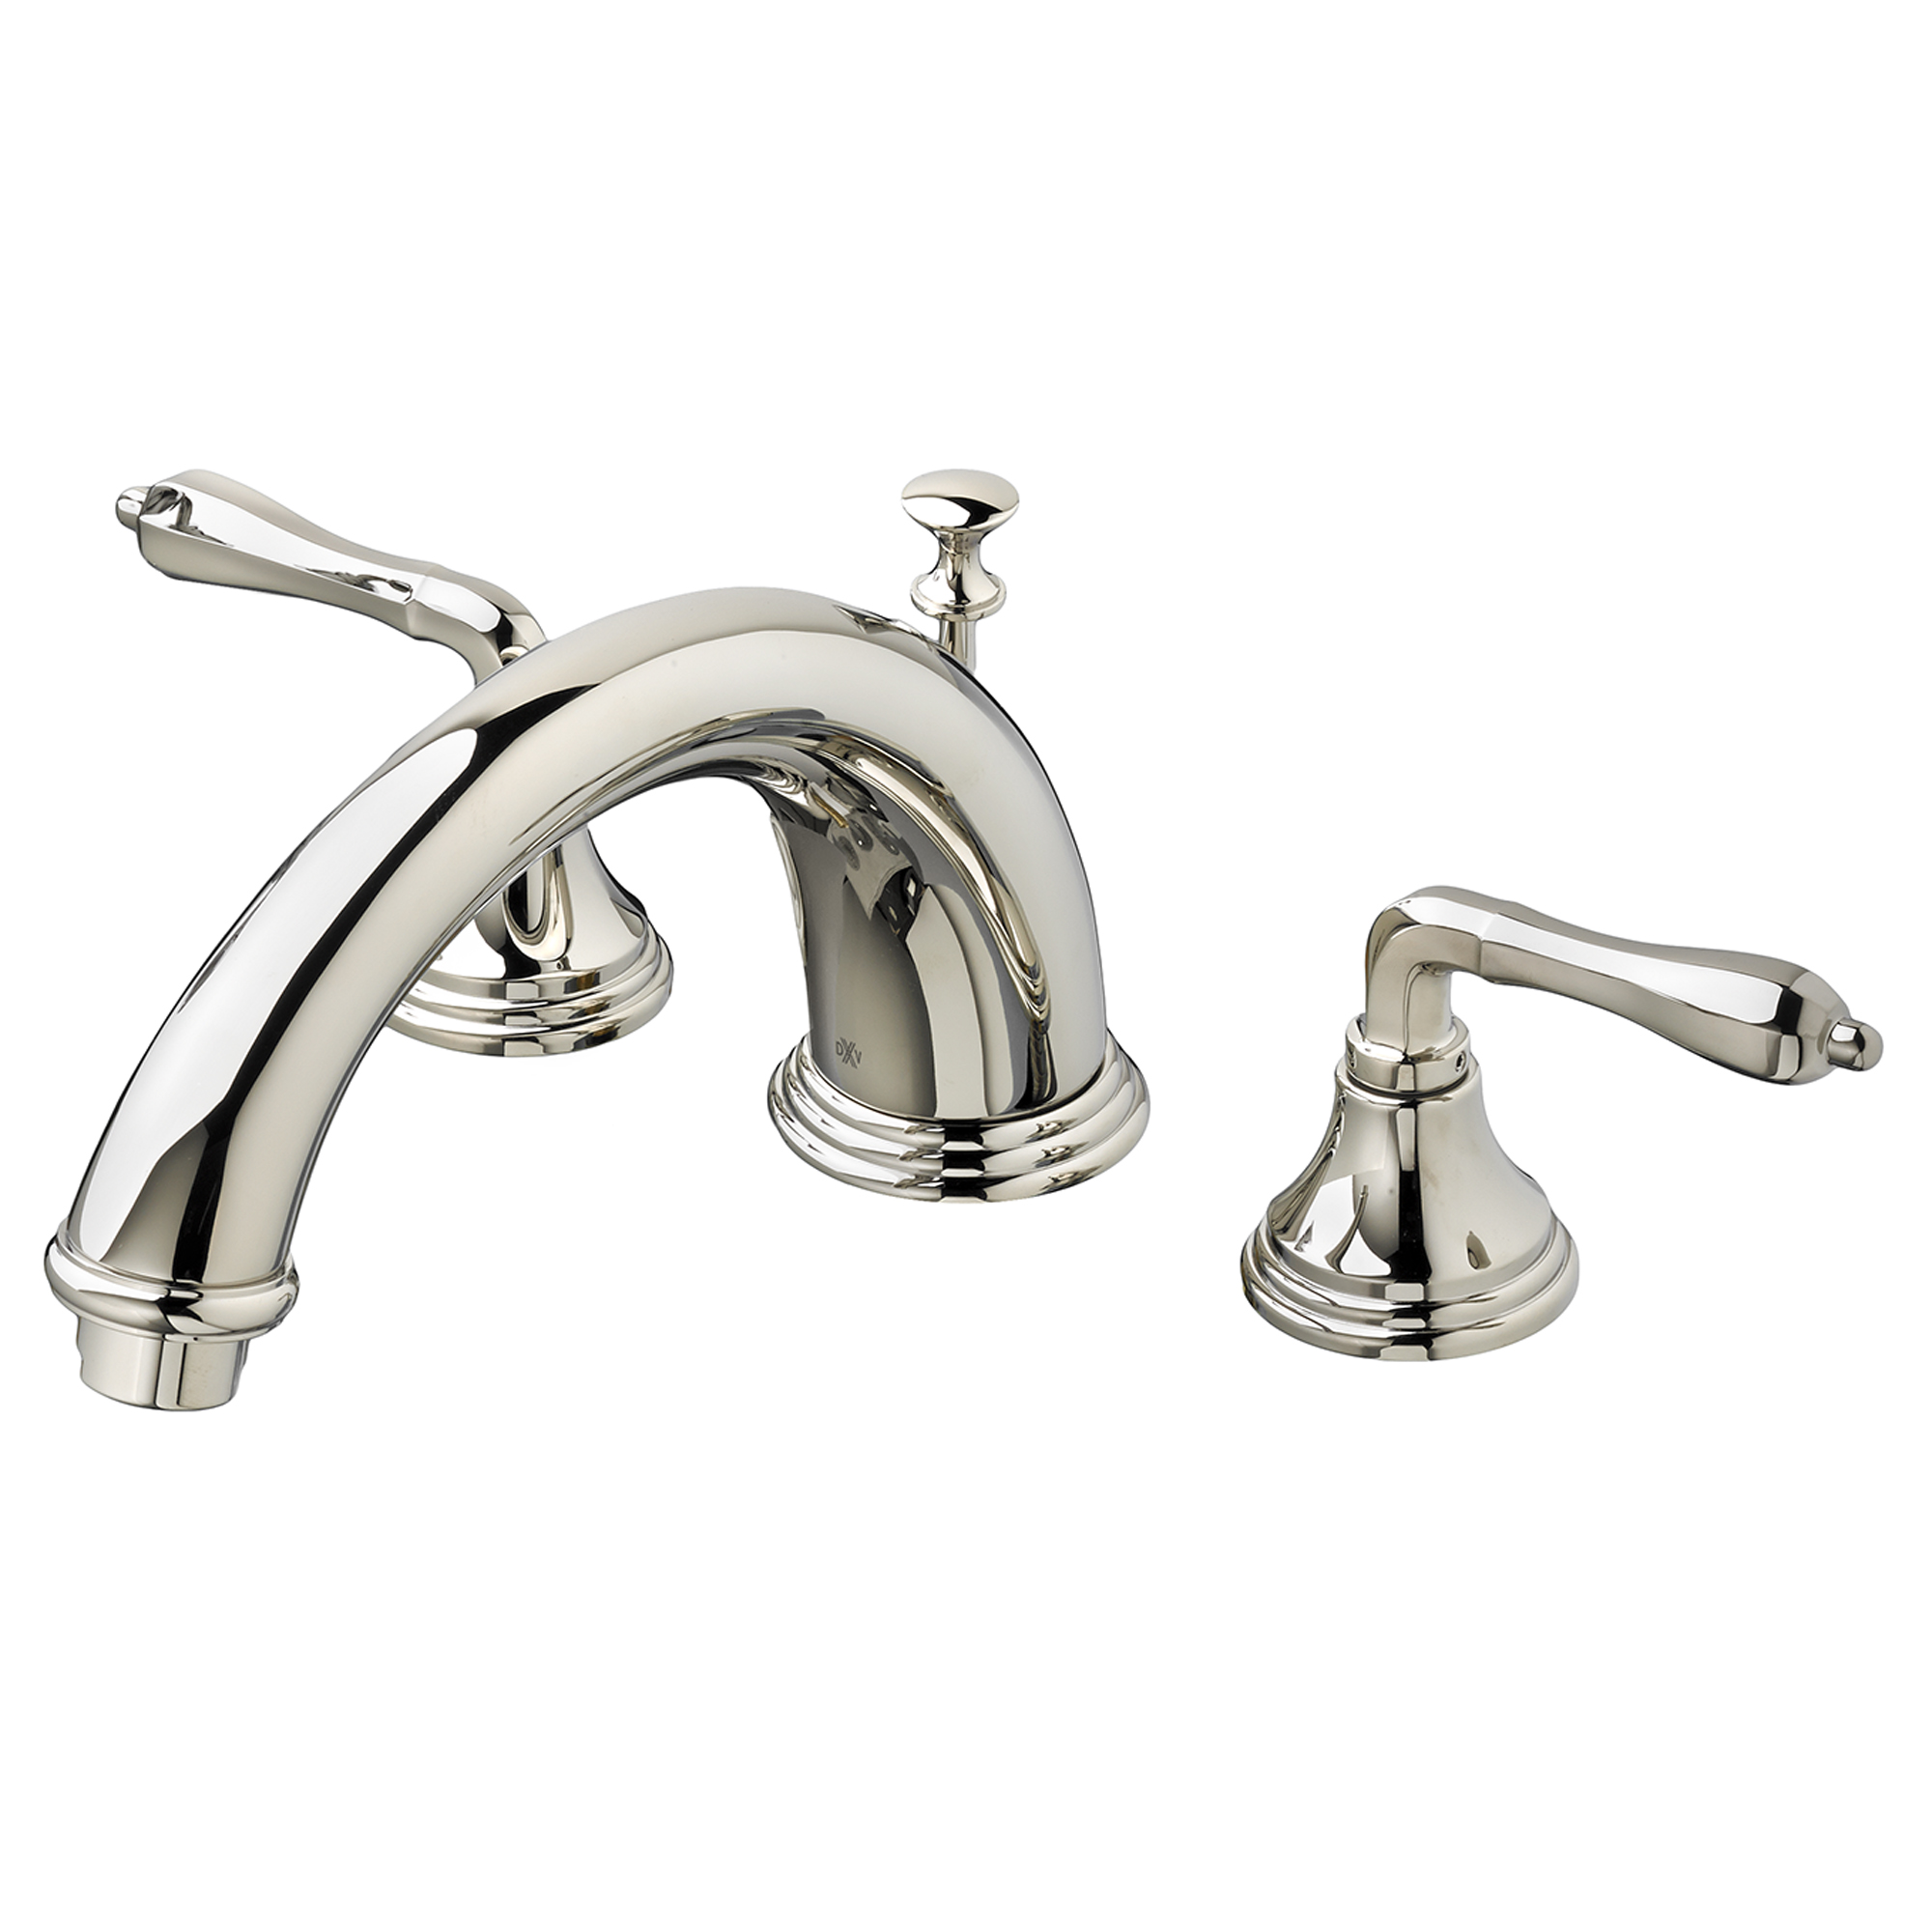 Ashbee 2-Handle Deck Mount Bathtub Faucet with Hand Shower and Lever Handles